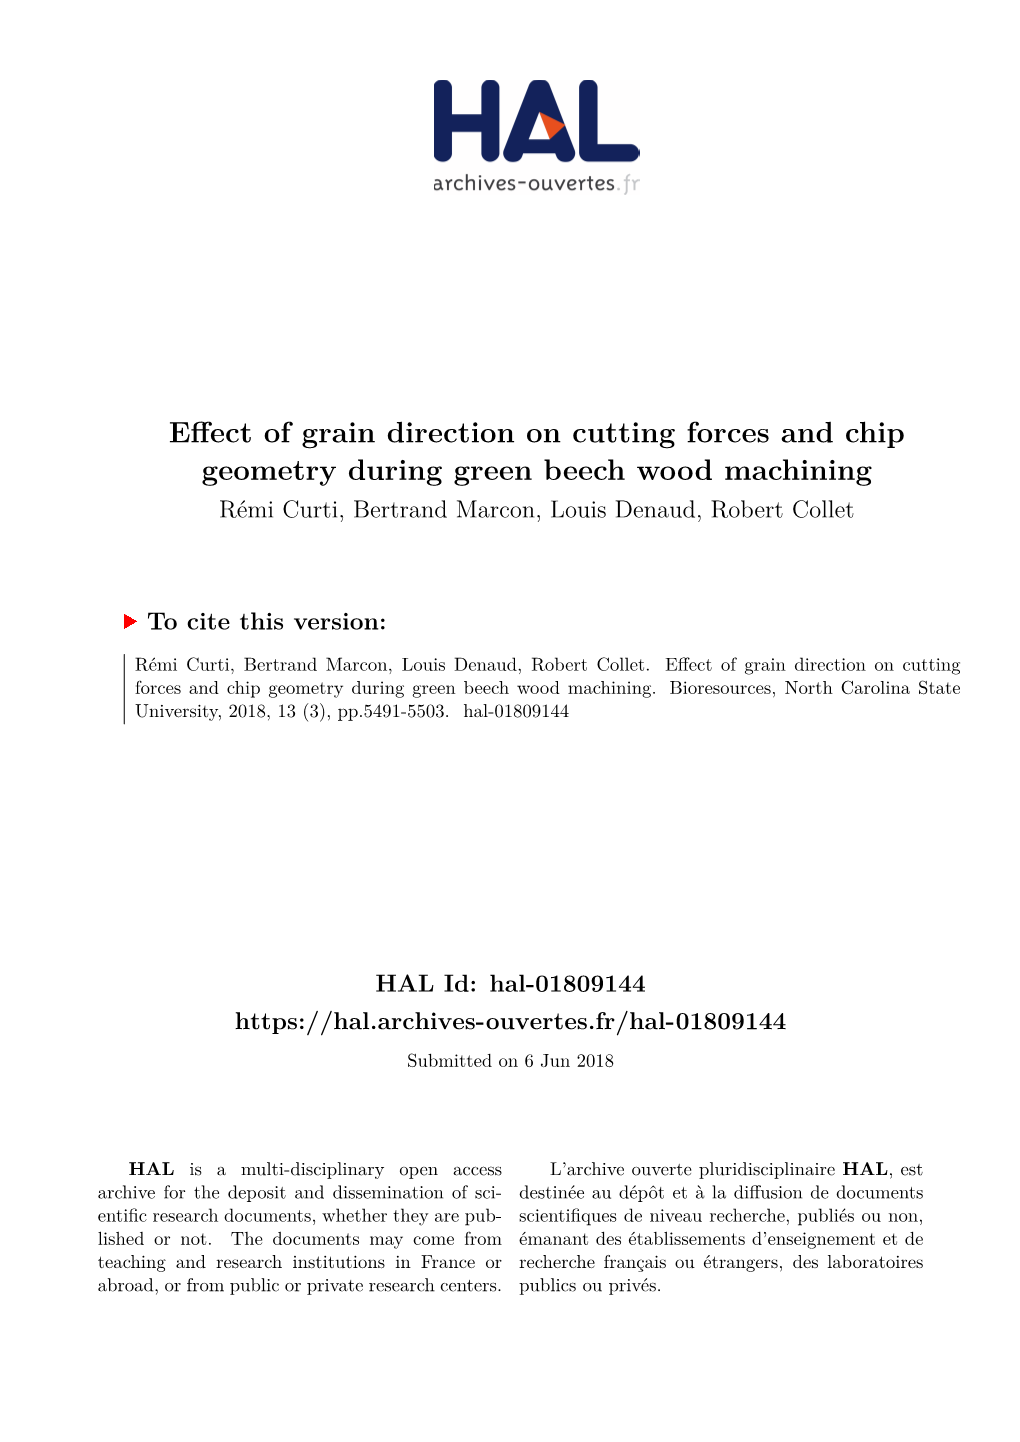 Effect of Grain Direction on Cutting Forces and Chip Geometry During Green Beech Wood Machining Rémi Curti, Bertrand Marcon, Louis Denaud, Robert Collet